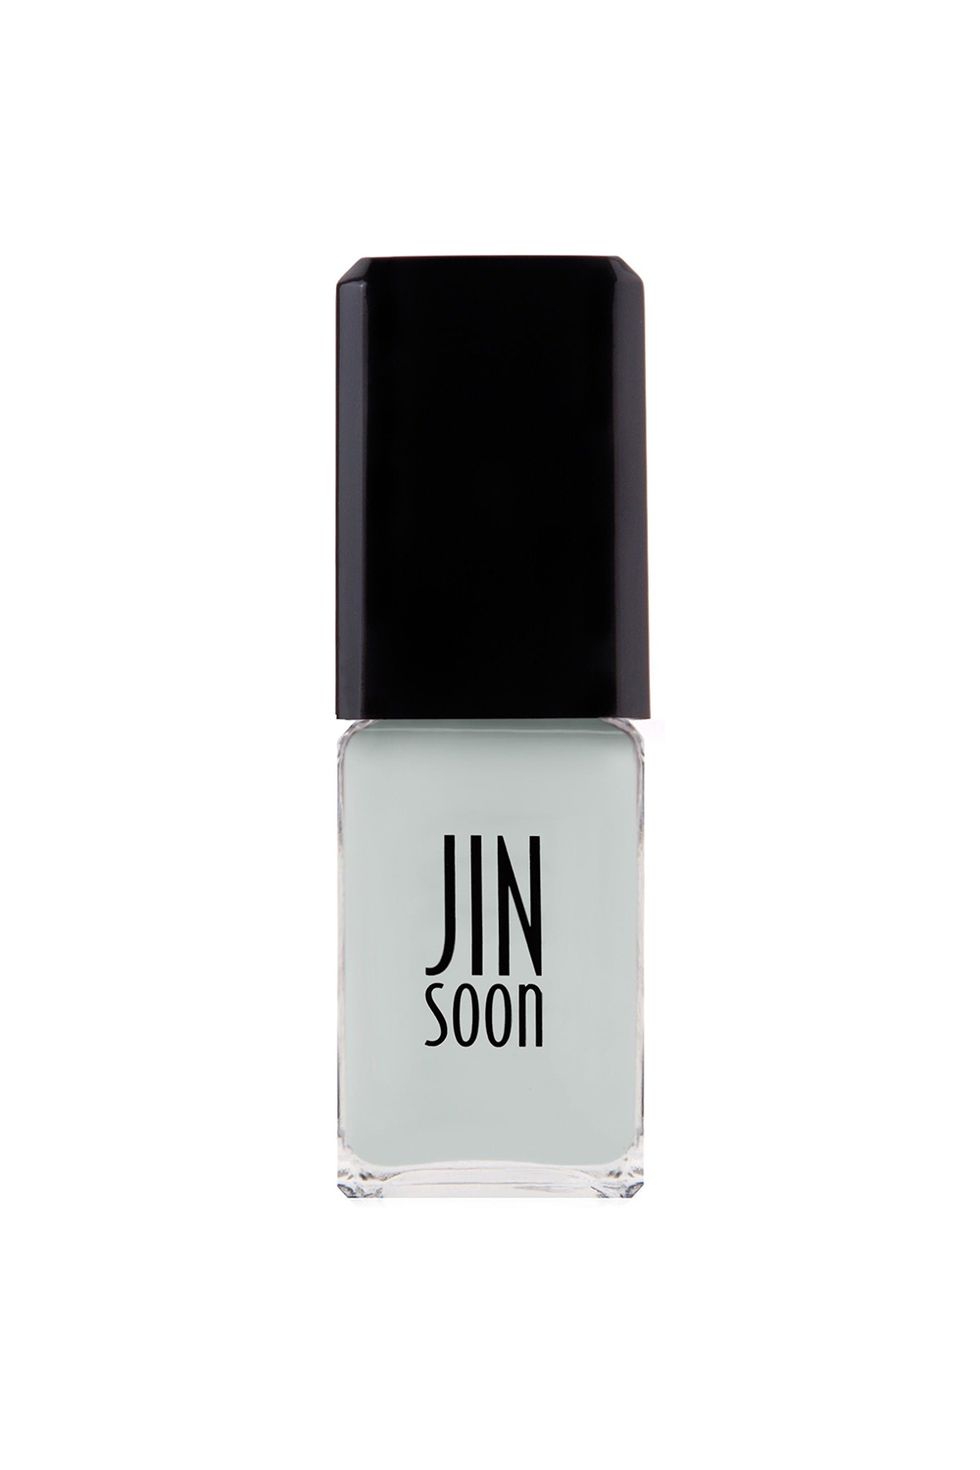 <p>"In the '90s, all the cool girls wore good old Wite-Out as "nail polish." I still have a tender spot in my heart for that look, so I like this JINsoon polish plus a coat of their Matte Maker. Fashion: but make it an office product.<span class="redactor-invisible-space" data-verified="redactor" data-redactor-tag="span" data-redactor-class="redactor-invisible-space">" —<span class="redactor-invisible-space" data-verified="redactor" data-redactor-tag="span" data-redactor-class="redactor-invisible-space"></span>&nbsp;Estelle Tang, ELLE.com Culture Editor&nbsp;</span></p><p><span class="redactor-invisible-space" data-verified="redactor" data-redactor-tag="span" data-redactor-class="redactor-invisible-space"><em data-redactor-tag="em" data-verified="redactor">JINsoon Nail Polish in Kookie White, $18; <a href="http://jinsoon.com/kookie-white/" data-tracking-id="recirc-text-link">jinsoon.com</a></em></span></p><p><em data-redactor-tag="em" data-verified="redactor"><span class="redactor-invisible-space" data-verified="redactor" data-redactor-tag="span" data-redactor-class="redactor-invisible-space"></span>JINsoon Matte Maker</em><span class="redactor-invisible-space" data-verified="redactor" data-redactor-tag="span" data-redactor-class="redactor-invisible-space"><em data-redactor-tag="em" data-verified="redactor">, $18; </em><a href="http://jinsoon.com/matte-maker-matte-top-coat/" data-tracking-id="recirc-text-link"><em data-redactor-tag="em" data-verified="redactor">jinsoon.com</em></a></span></p>